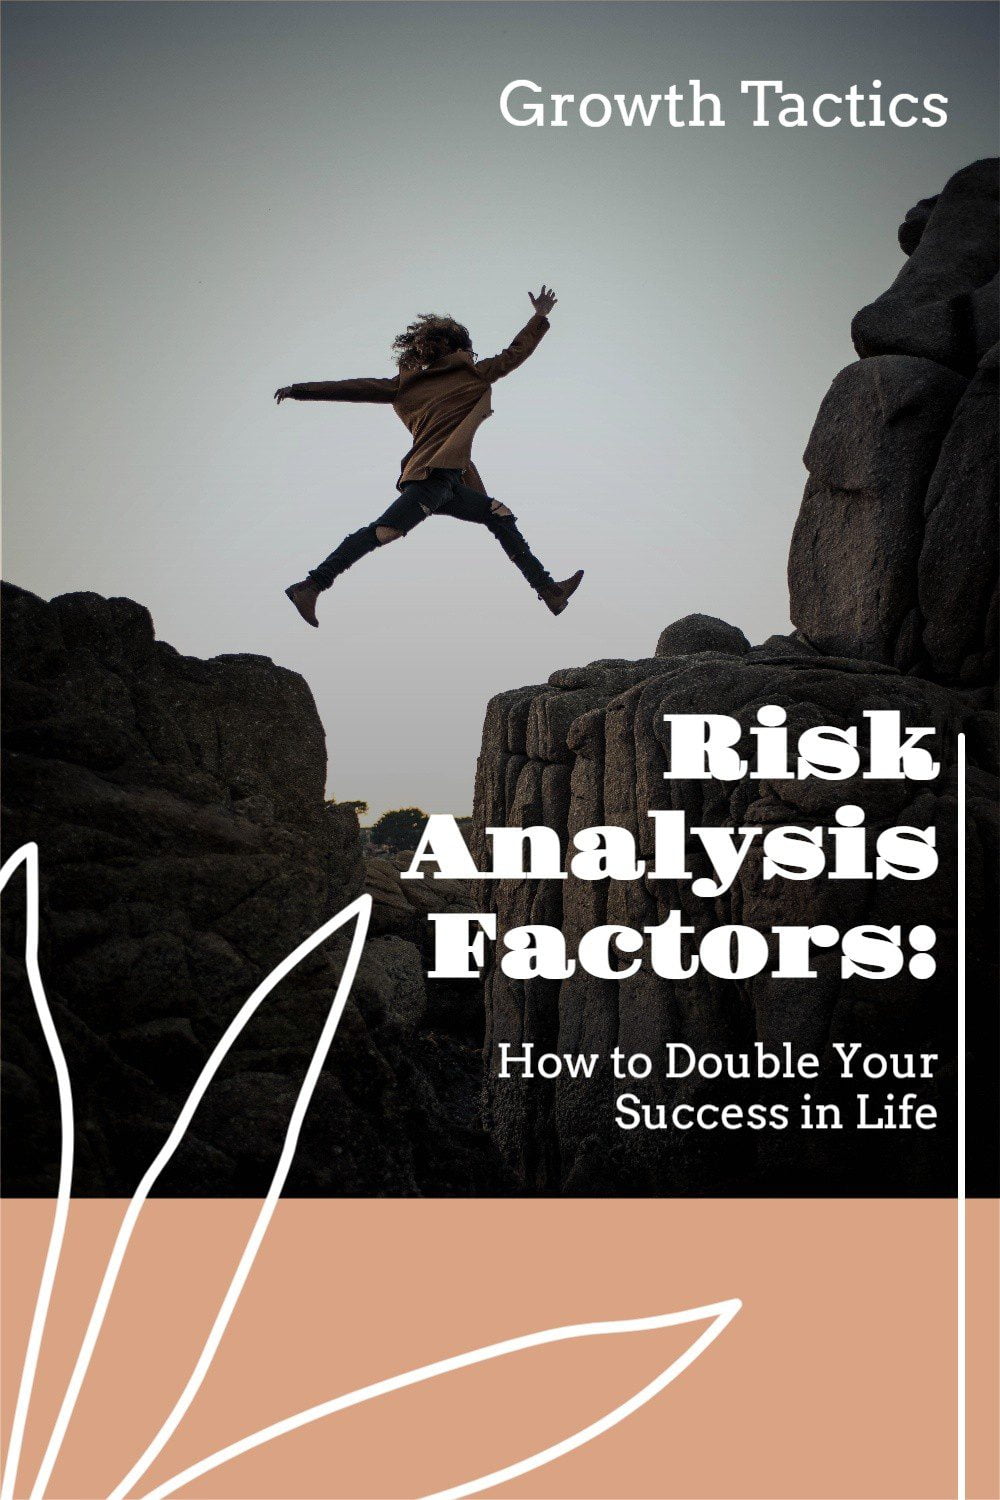 Risk Management Tools to Increase Your Success in Life